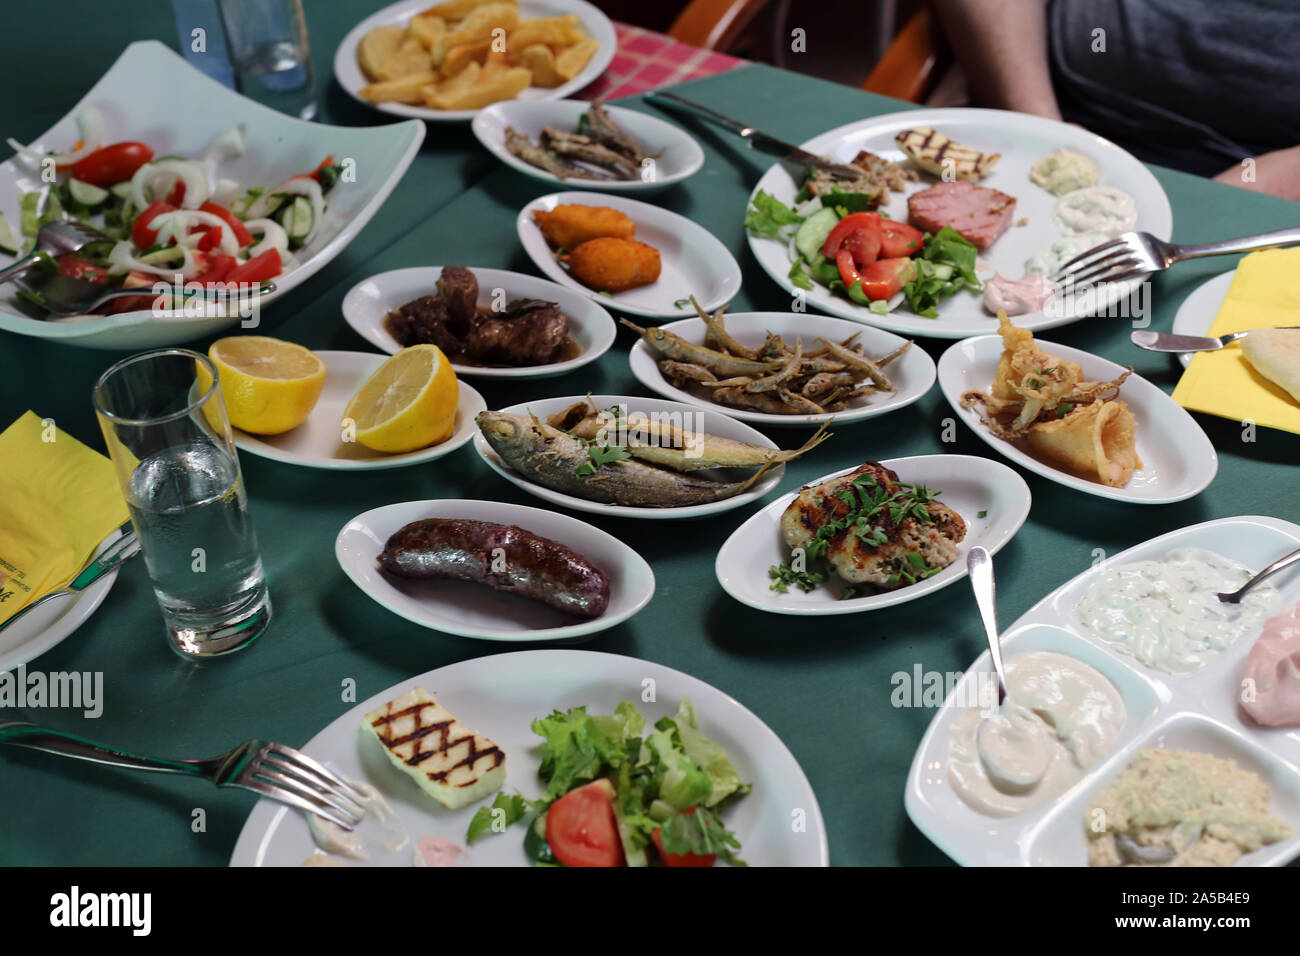 Huge meze meal served commonly in Cyprus. In this photo you can see different fish, sausages, vegetables, etc. on small plates on a table. Stock Photo